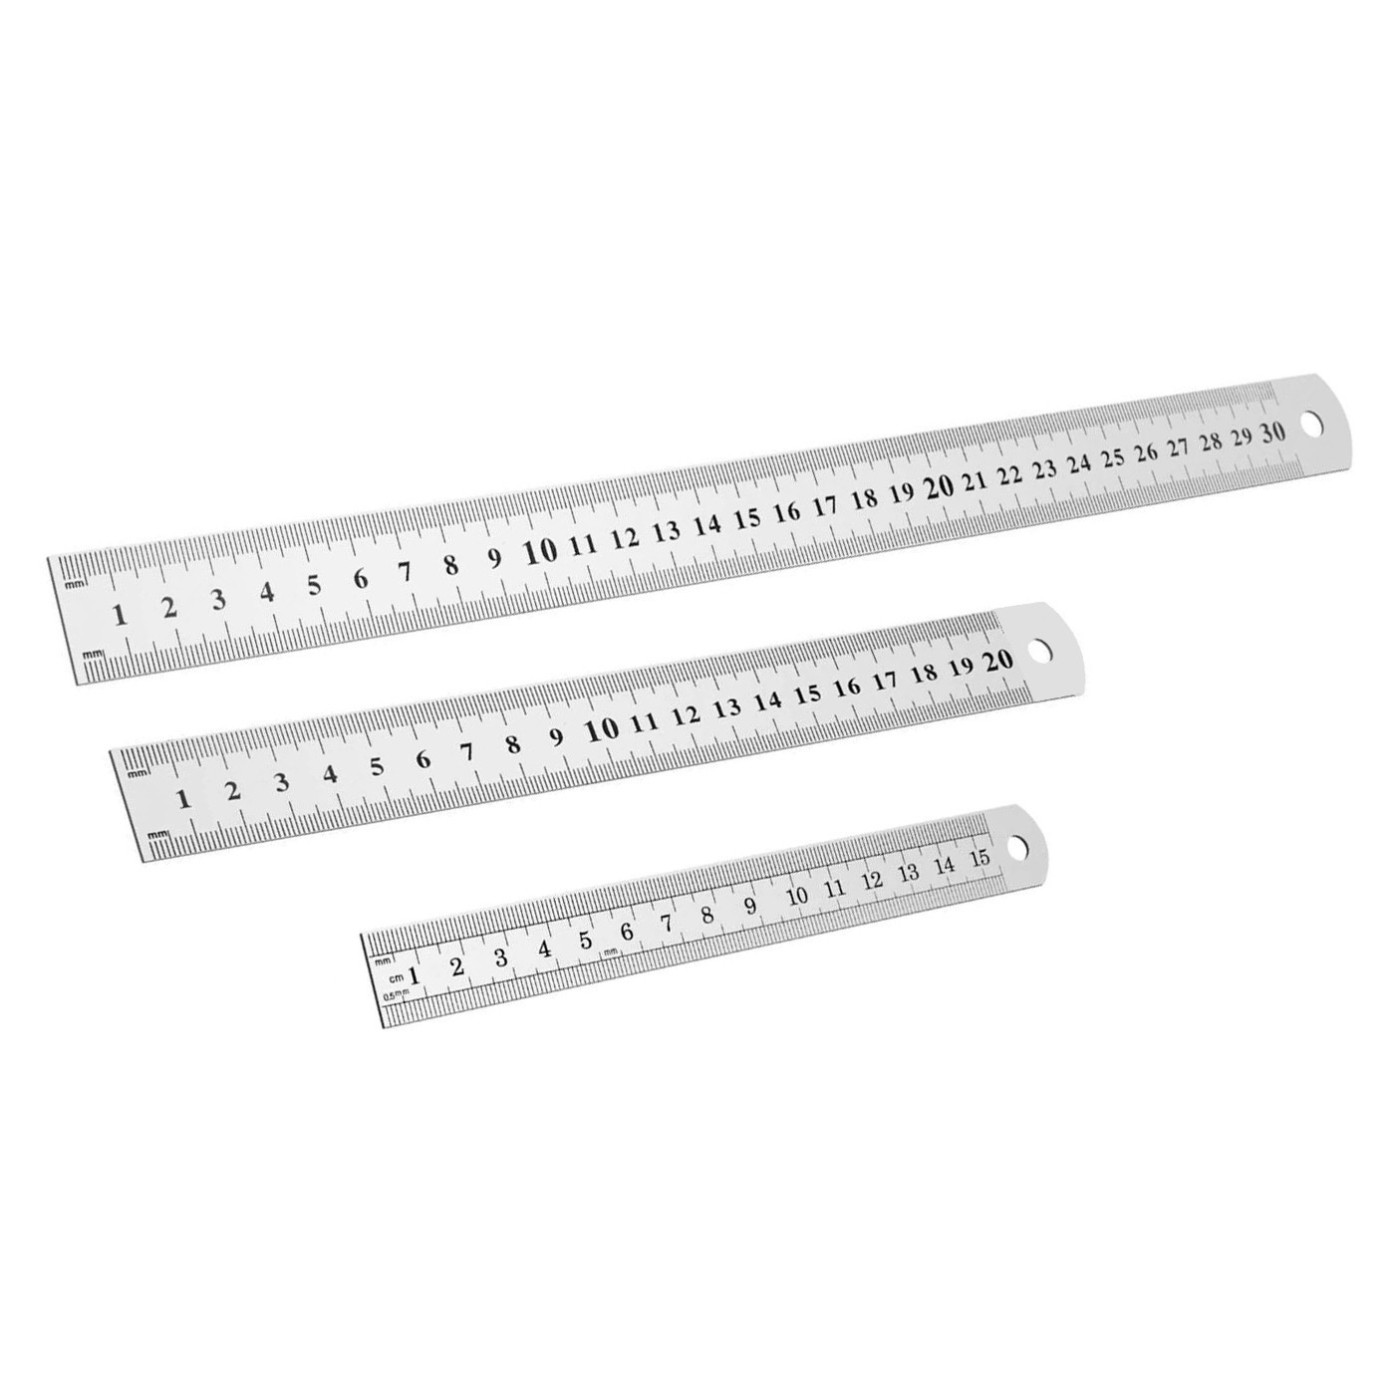 Triangular Ruler, 12 inch Metal Ruler, Triple Sided Color Coded